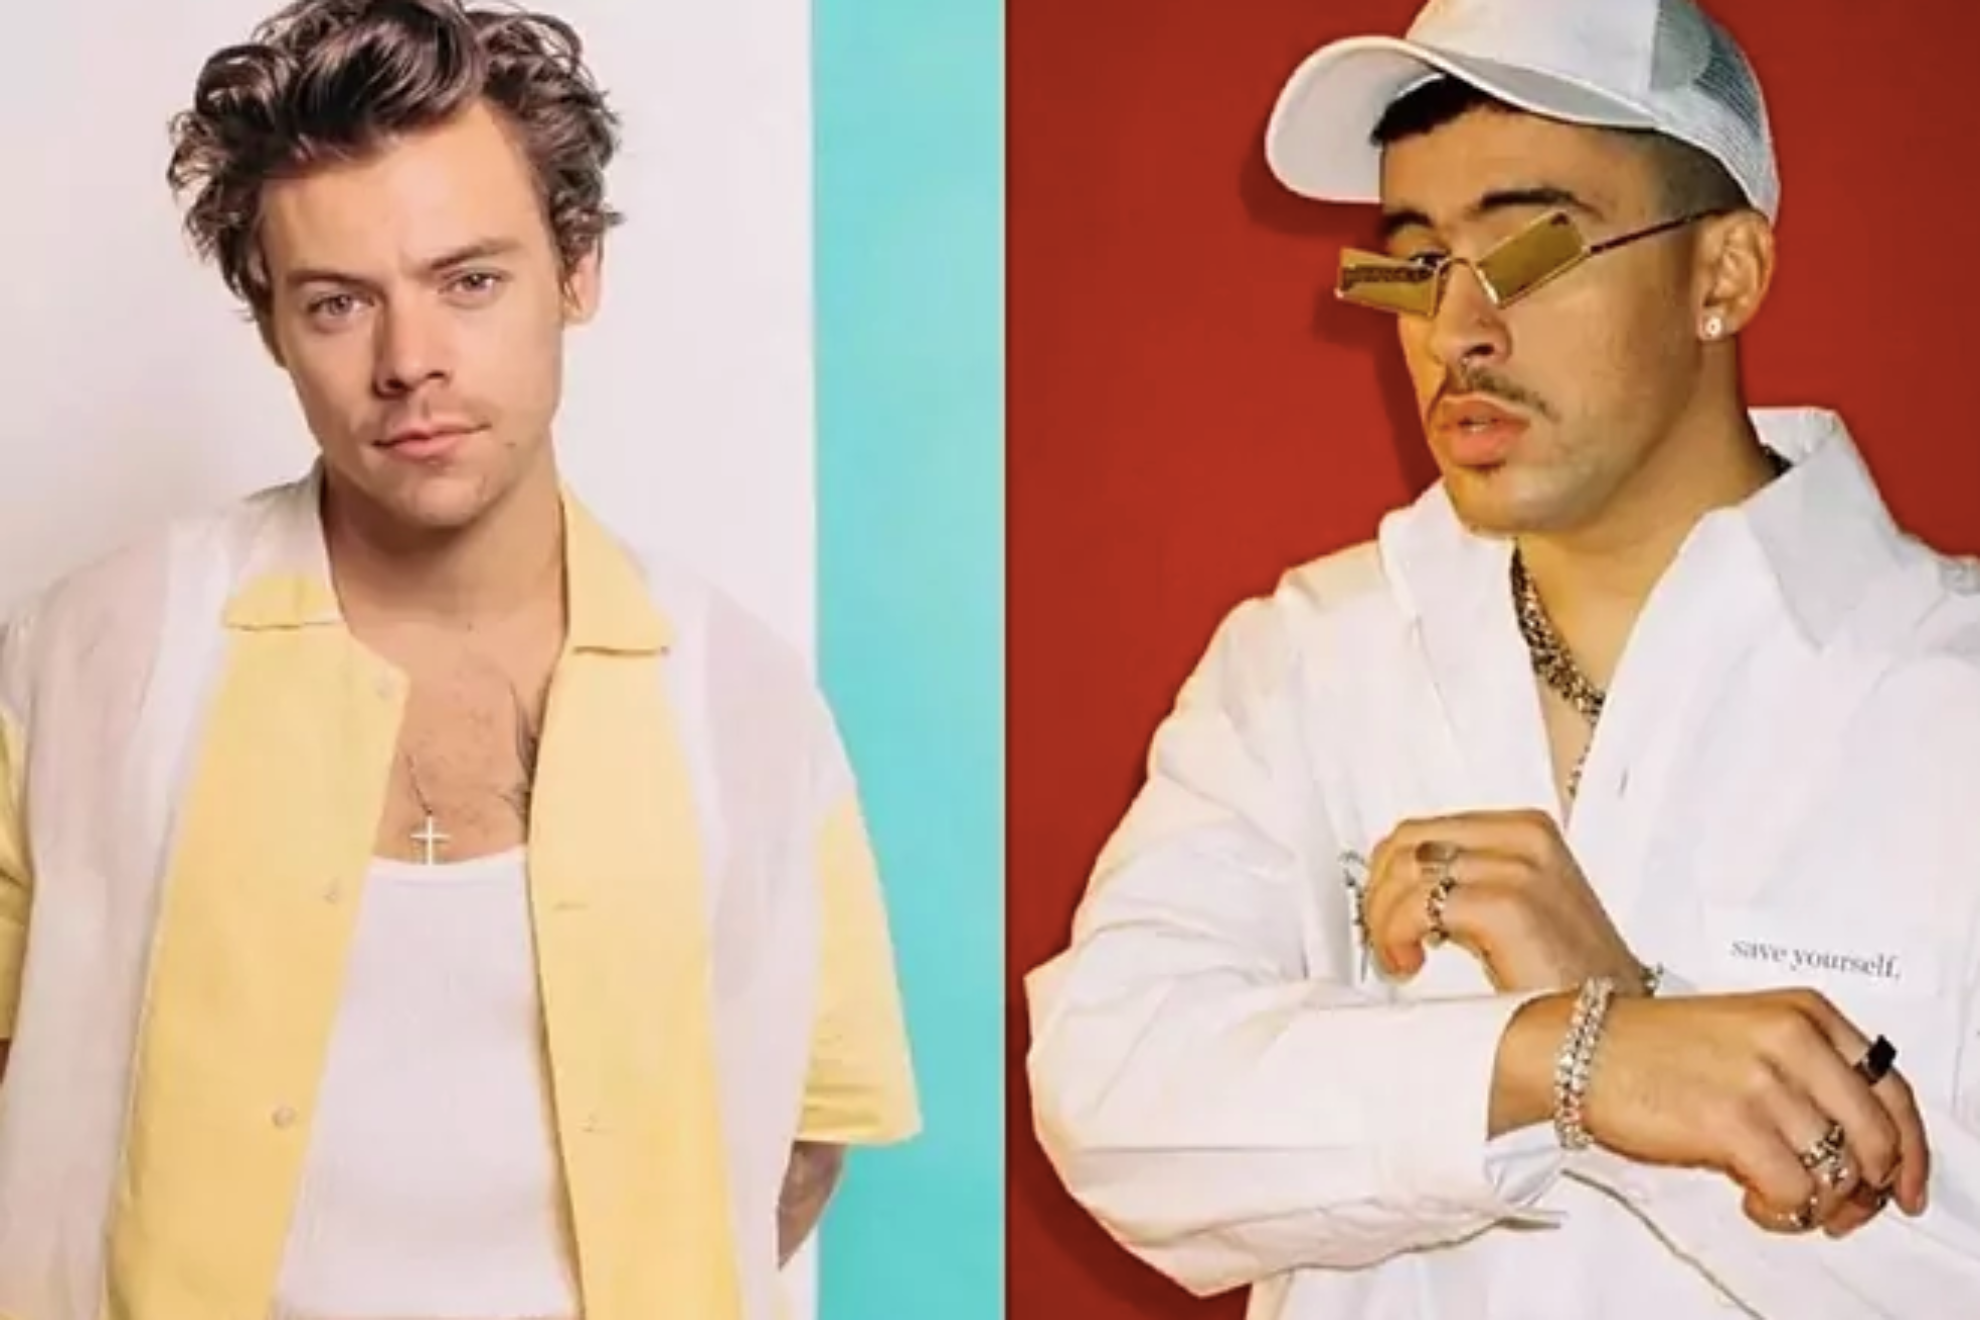 Bad Bunny comes in for harsh criticism for comparing himself to Harry Styles